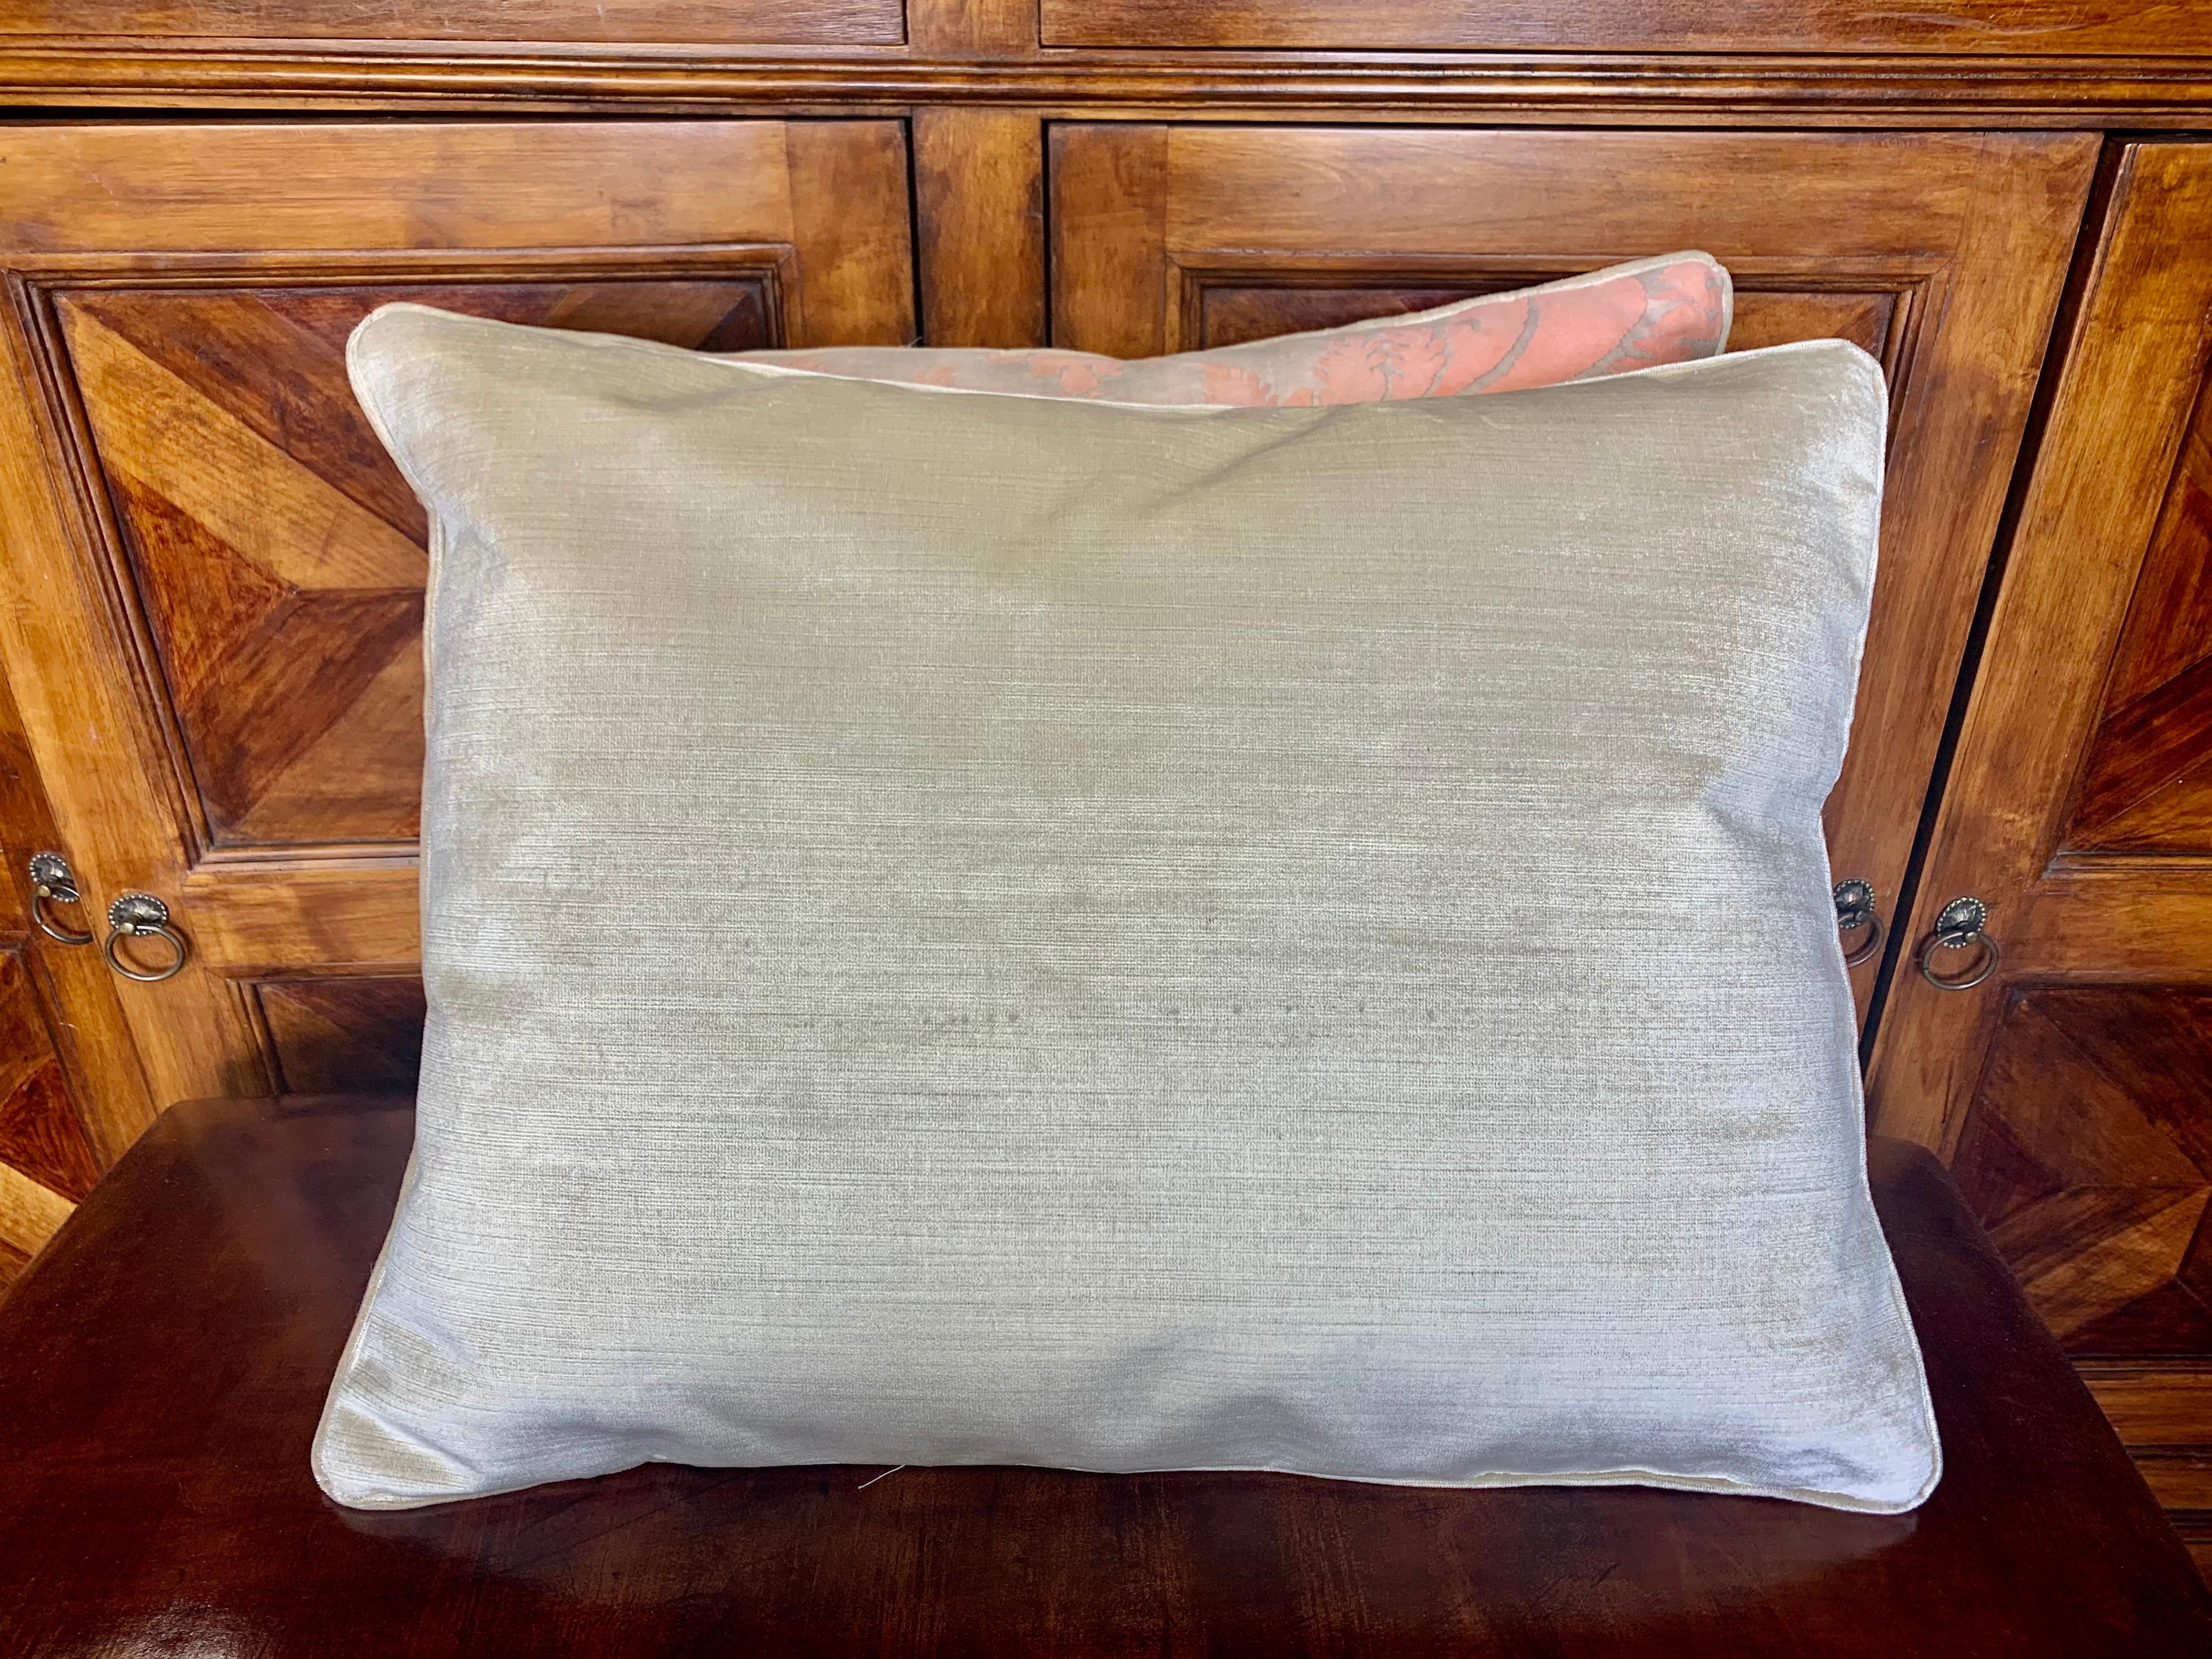 Late 20th Century Vintage Glicine Patterned Fortuny Pillows, Apricot & Silvery Gray